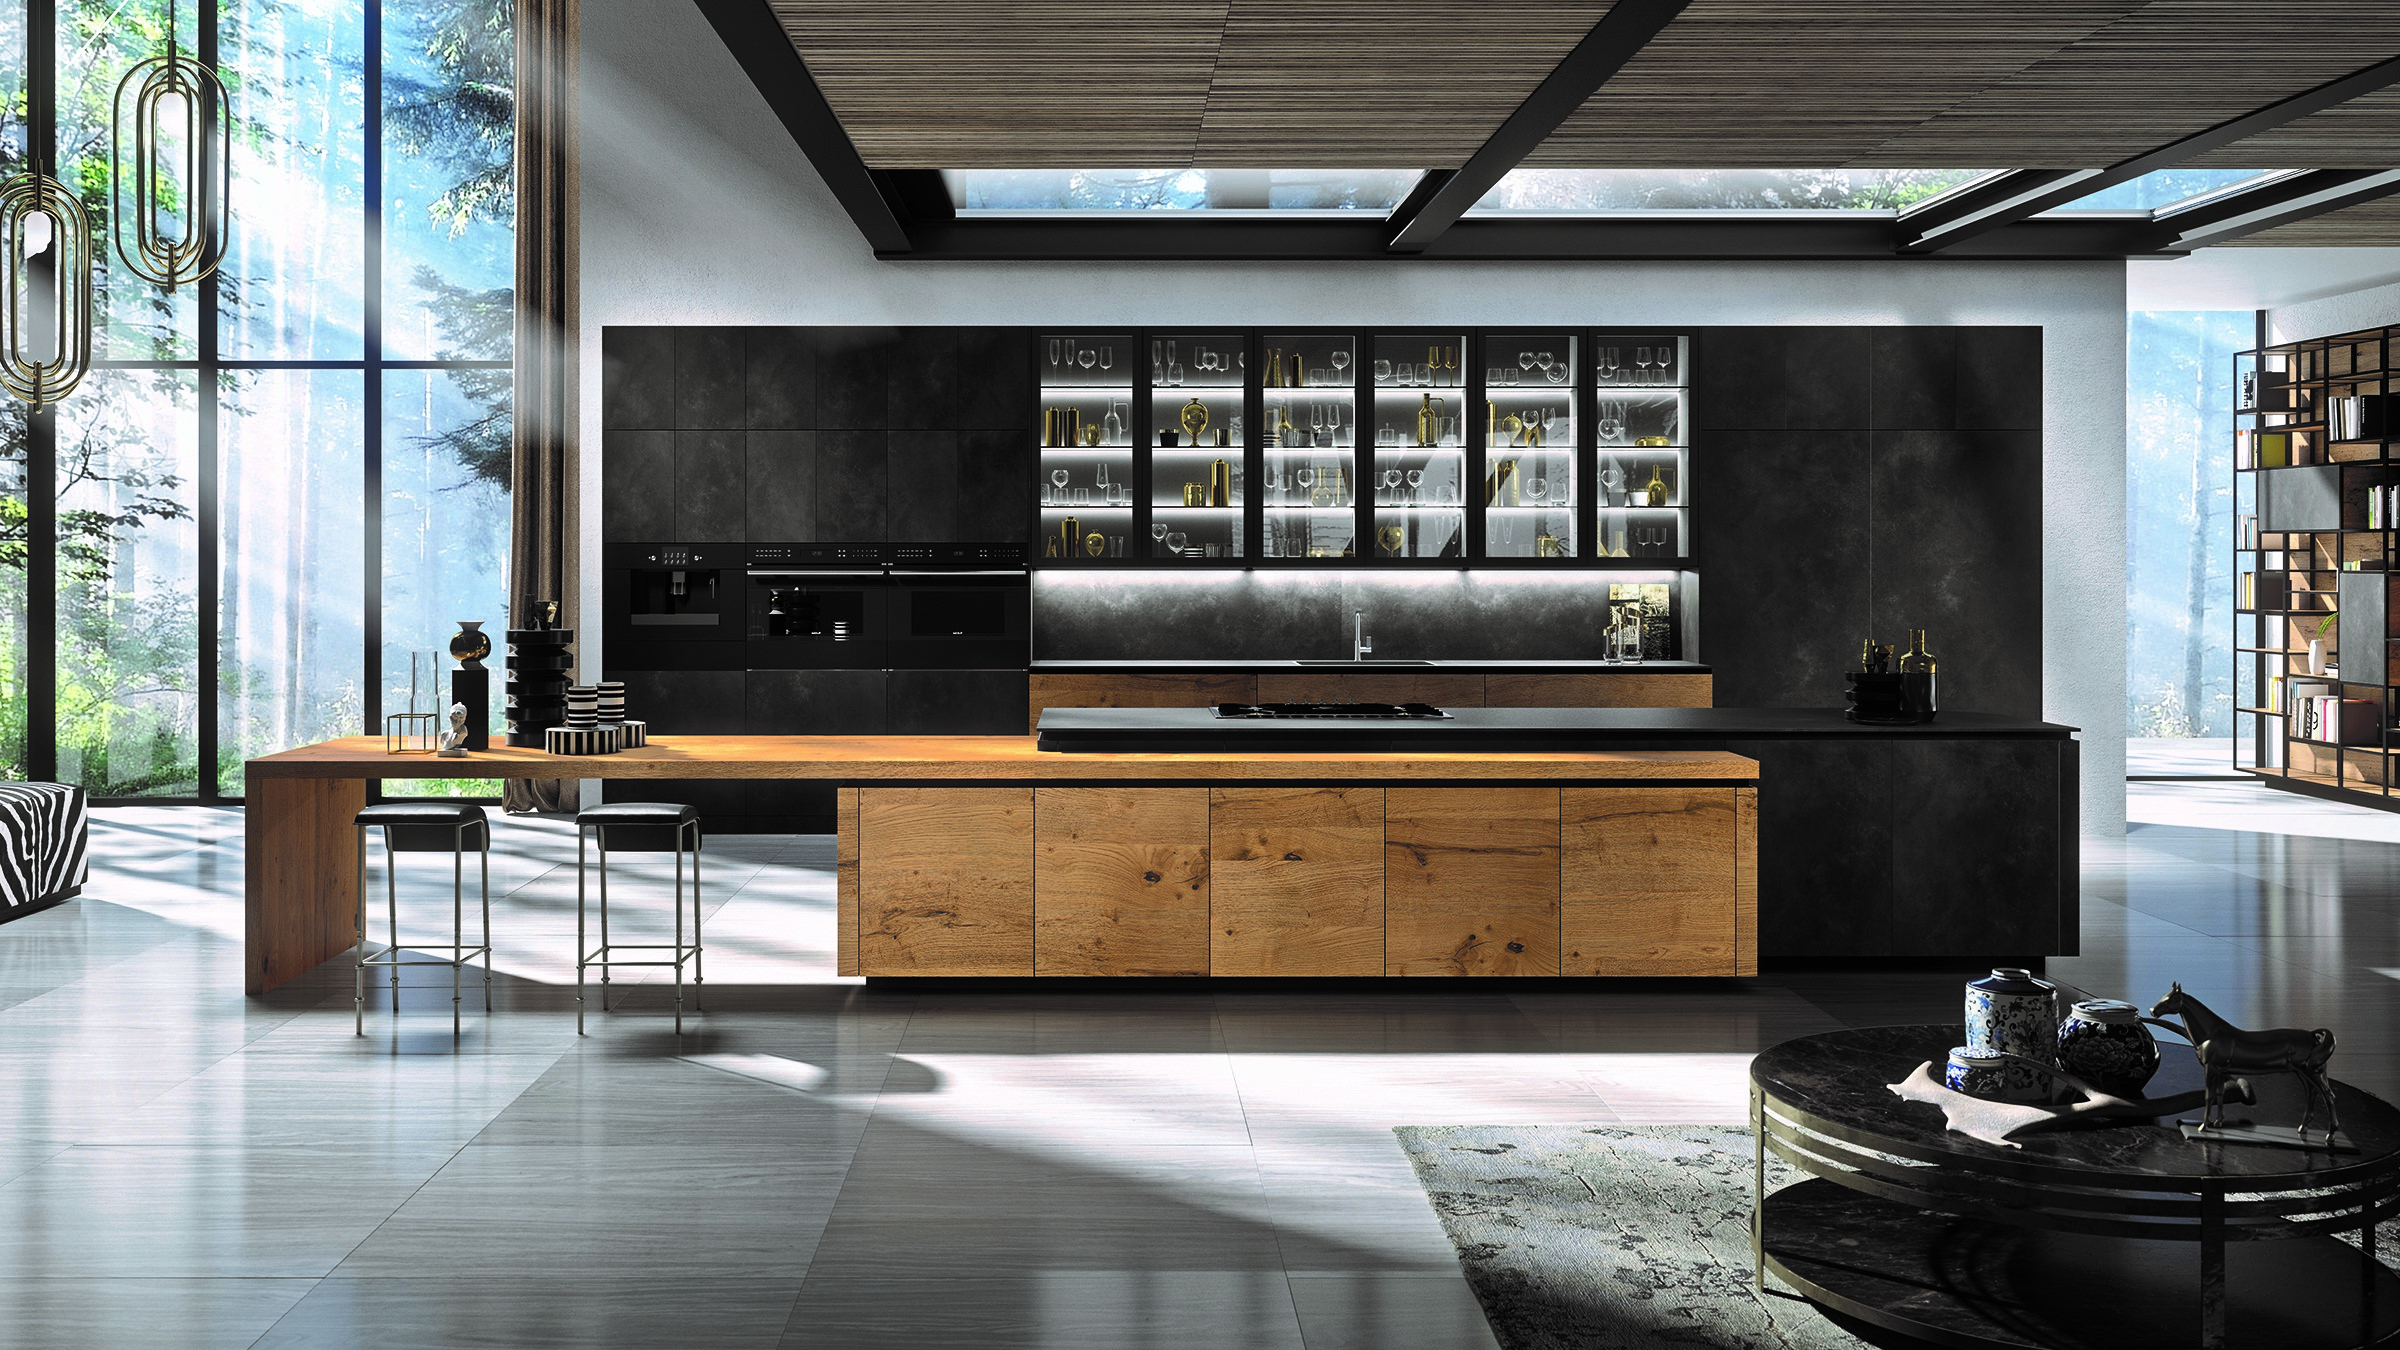 H01 ELEGANTE Bespoke Heartwood kitchen, chosen by The European Centre for Architecture Art Design and Urban Studies and The Chicago Athenaeum: Museum of Architecture and Design among hundreds of submissions from around the world as a winner of the 2019 GREEN GOOD DESIGN Award. 